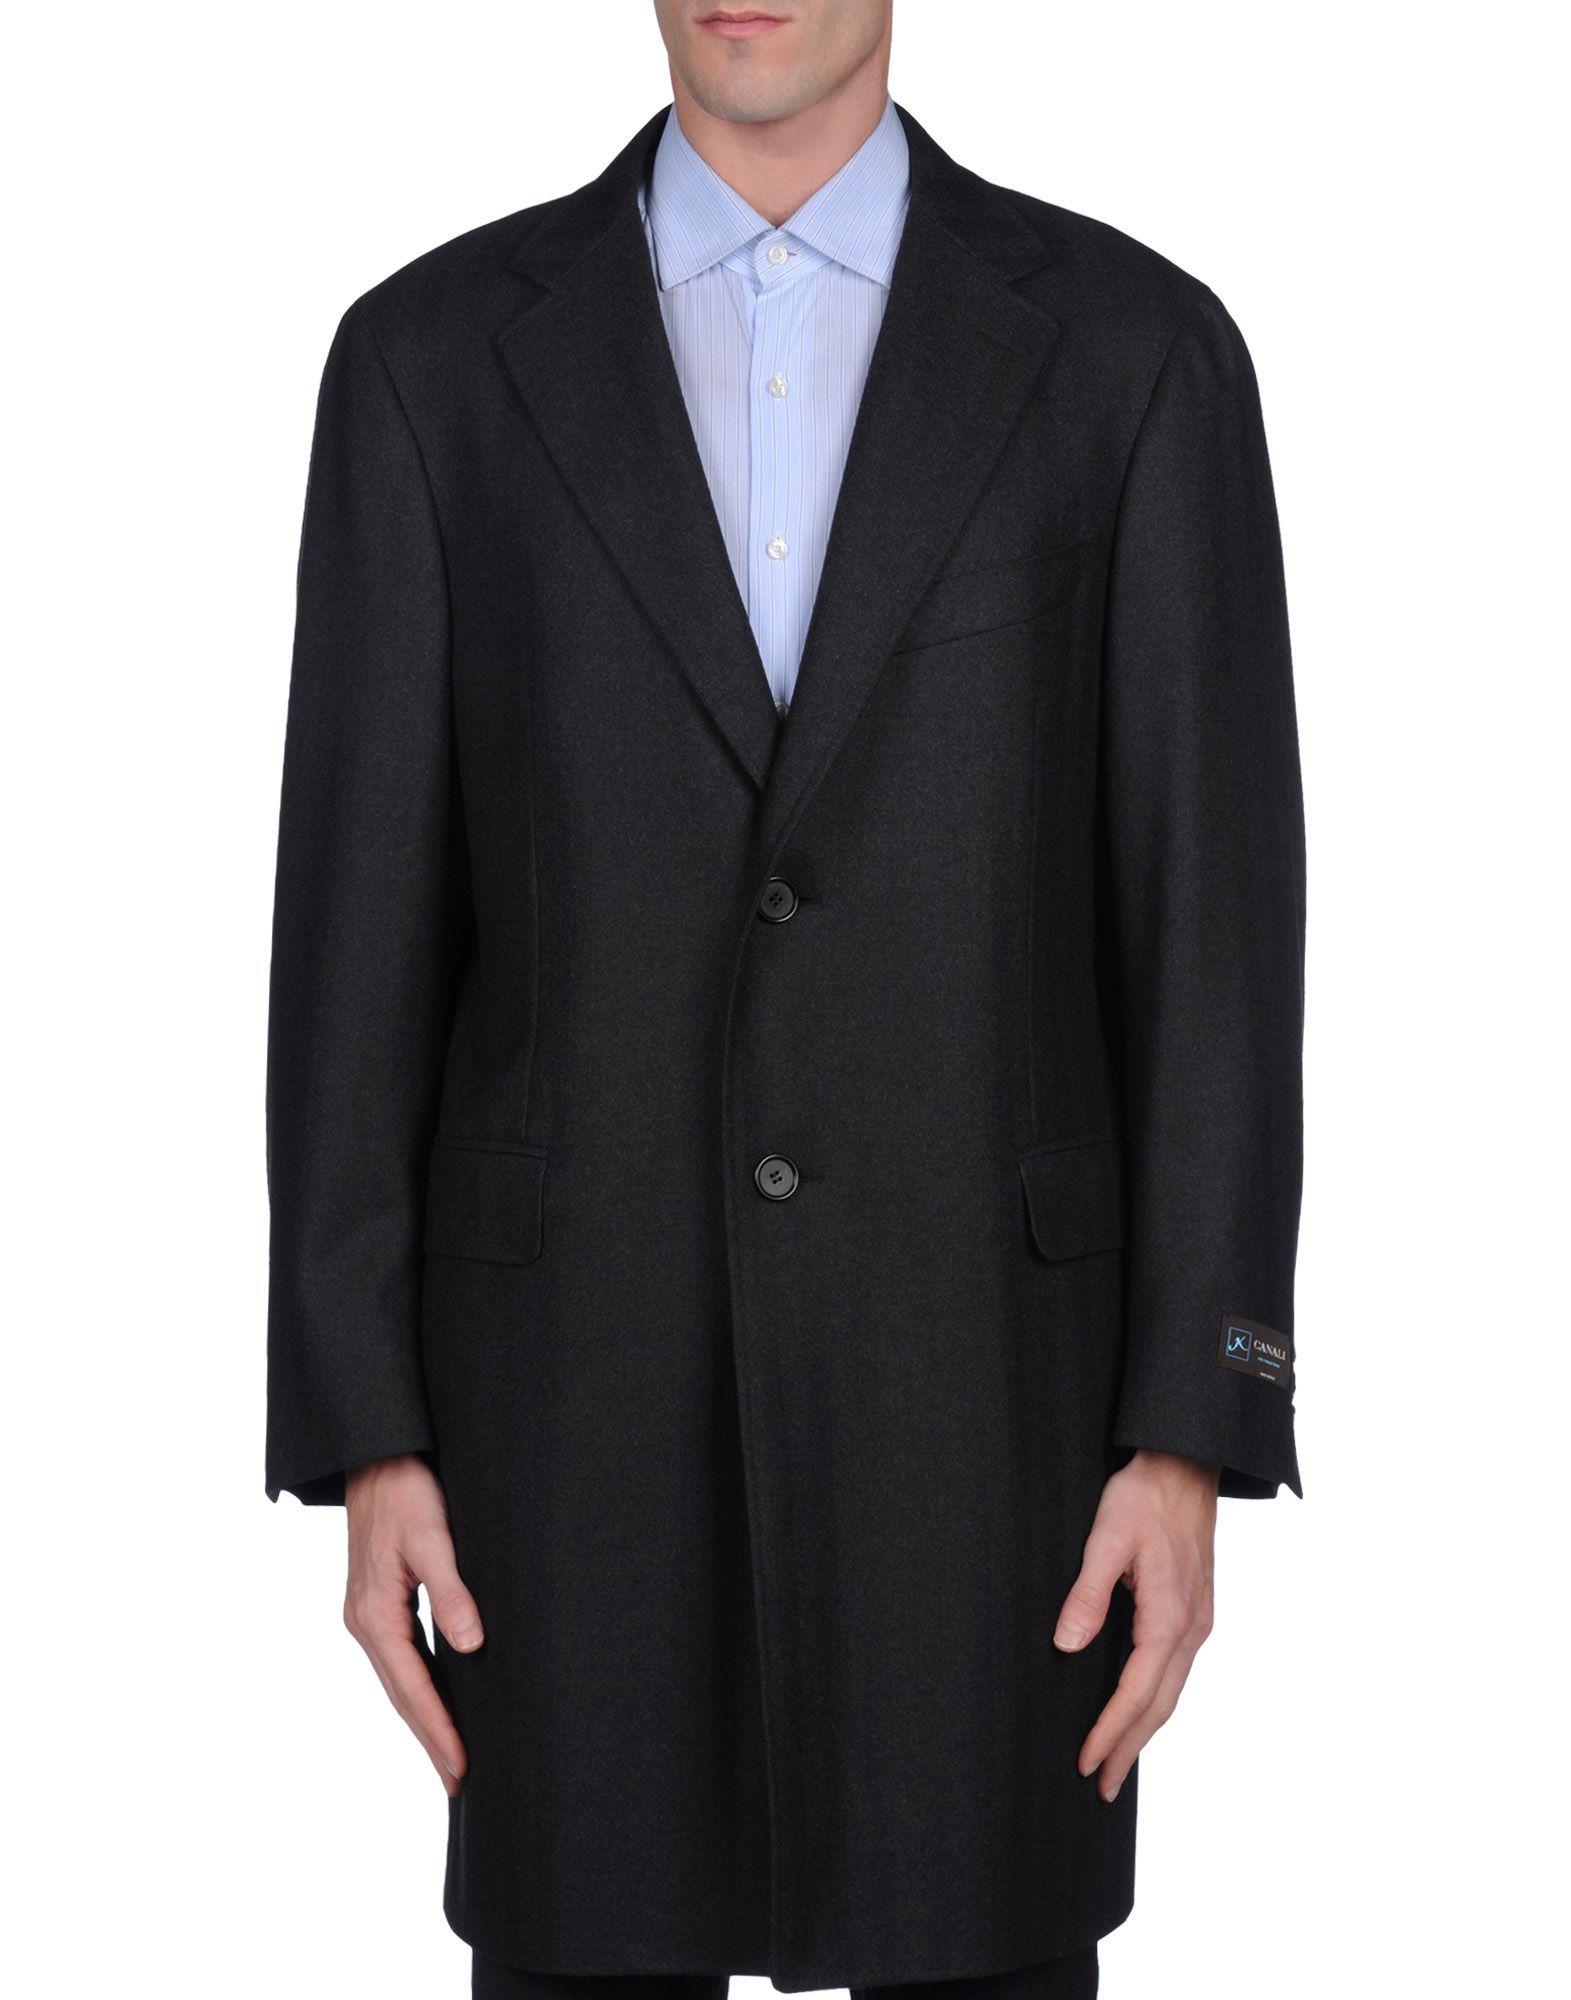 The Official Classic Men's Coats Thread - Page 14